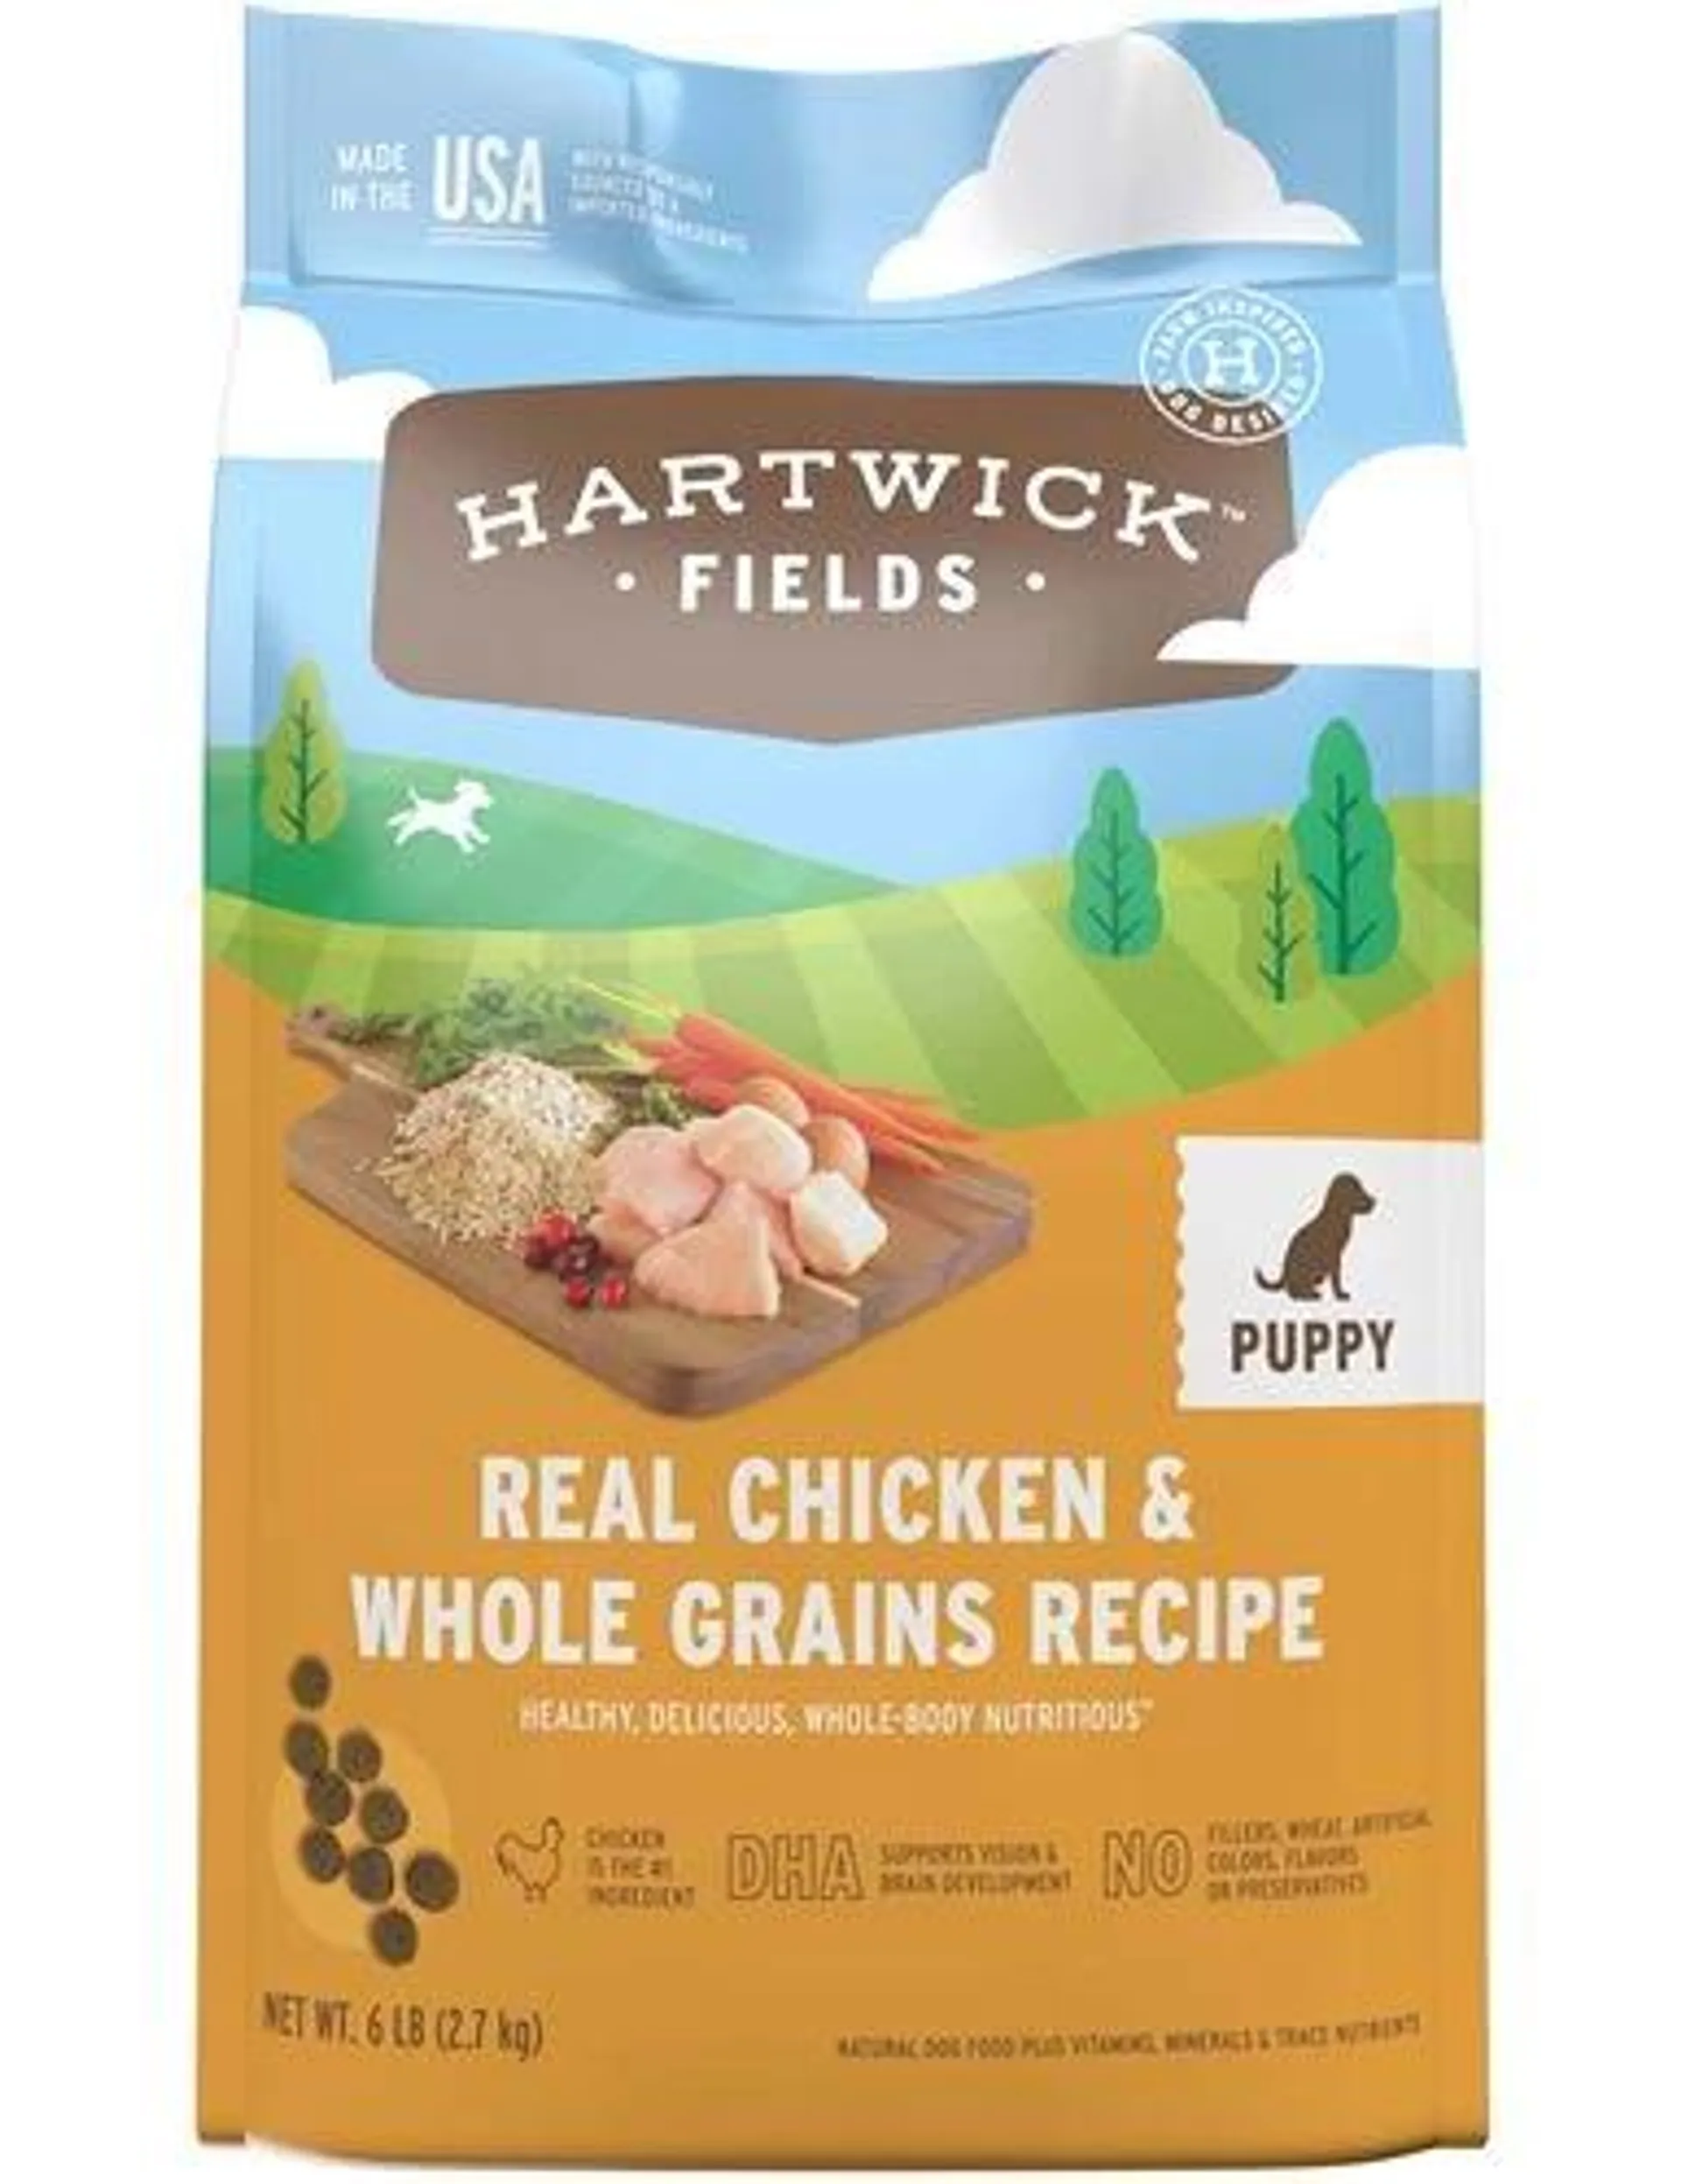 Hartwick Fields Puppy Real Chicken & Whole Grains Recipe, 6 Pounds